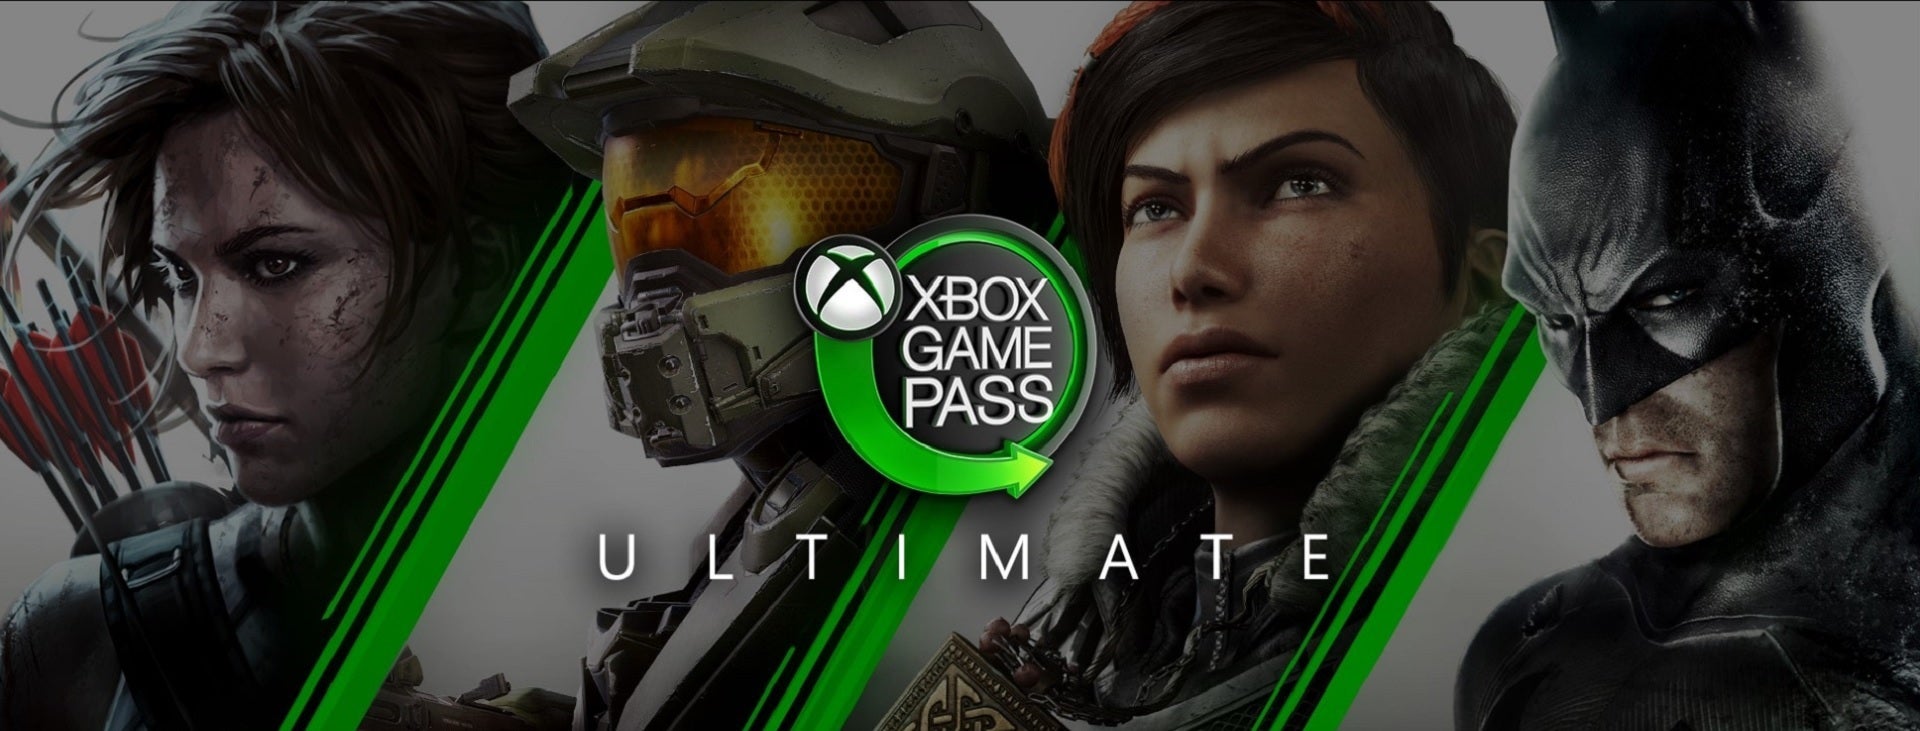 Image for Save up to £250/$360 on three years of Xbox Game Pass Ultimate while you can